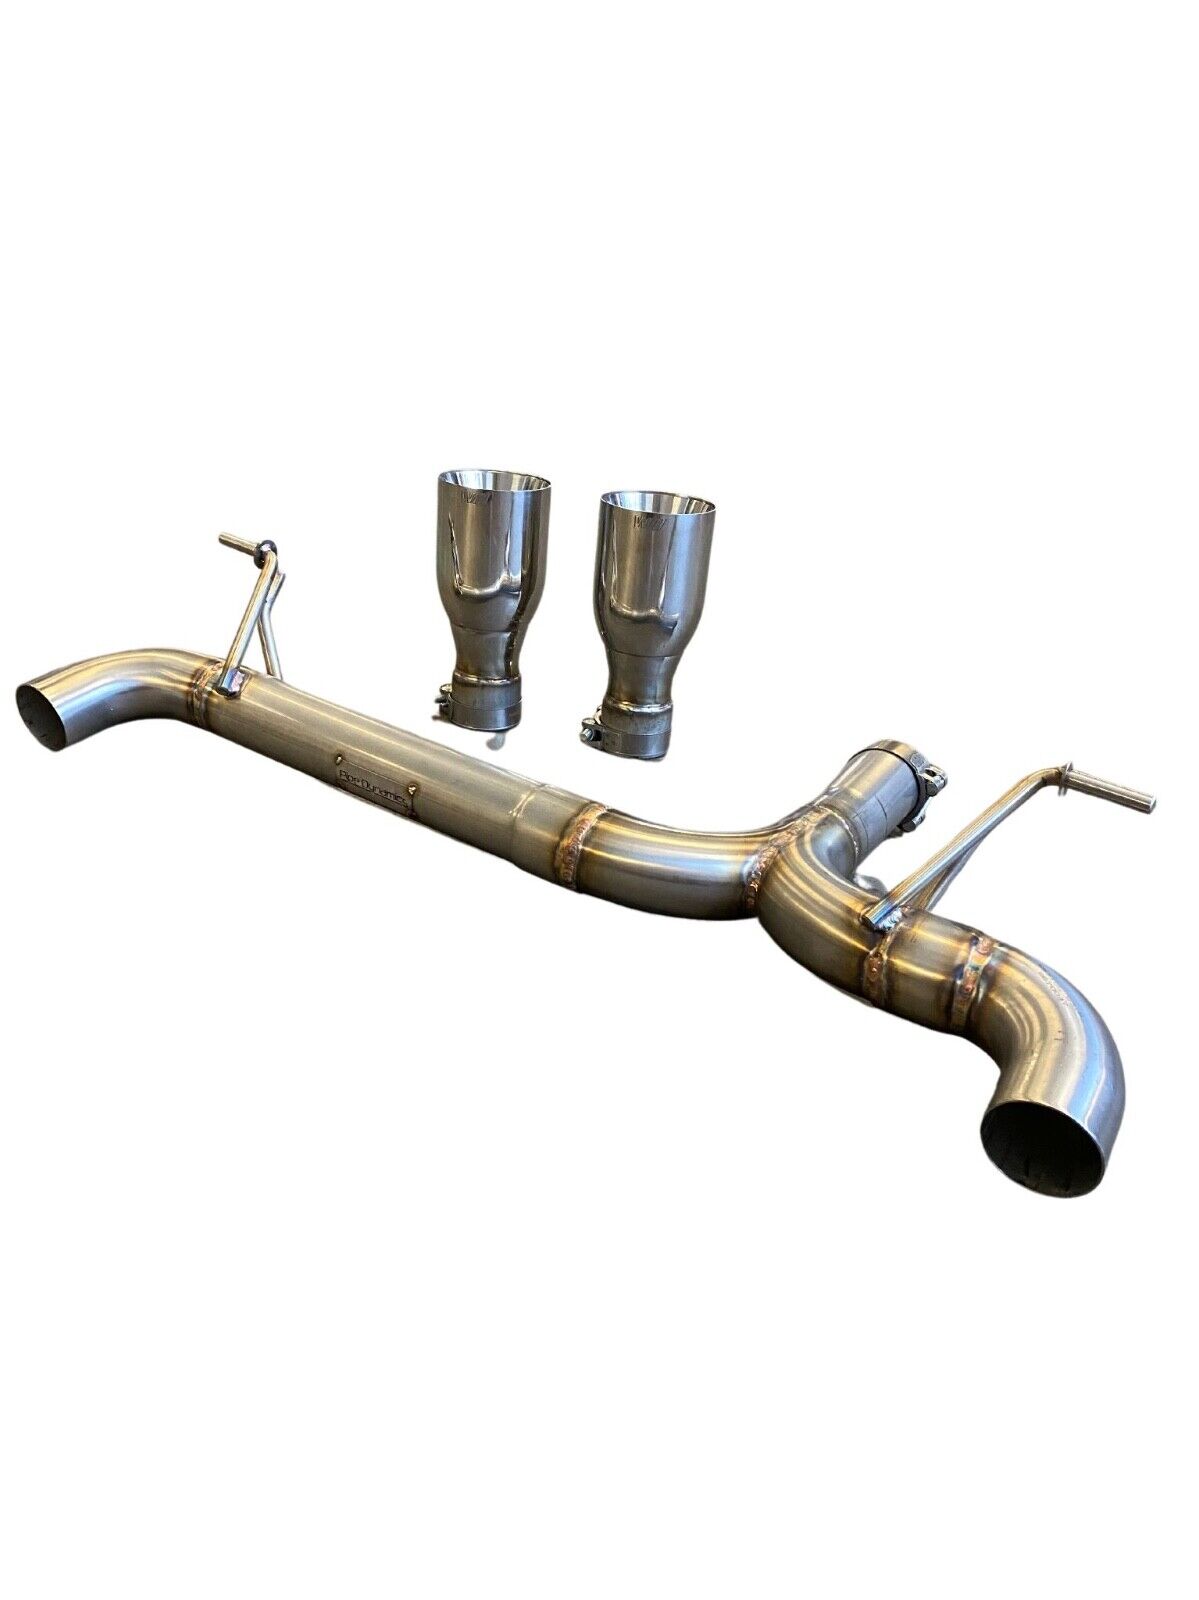 PIPE DYNAMICS BMW 320D LCI F30 F31 DUAL EXIT CONVERSION REAR EXHAUST 340i STYLE